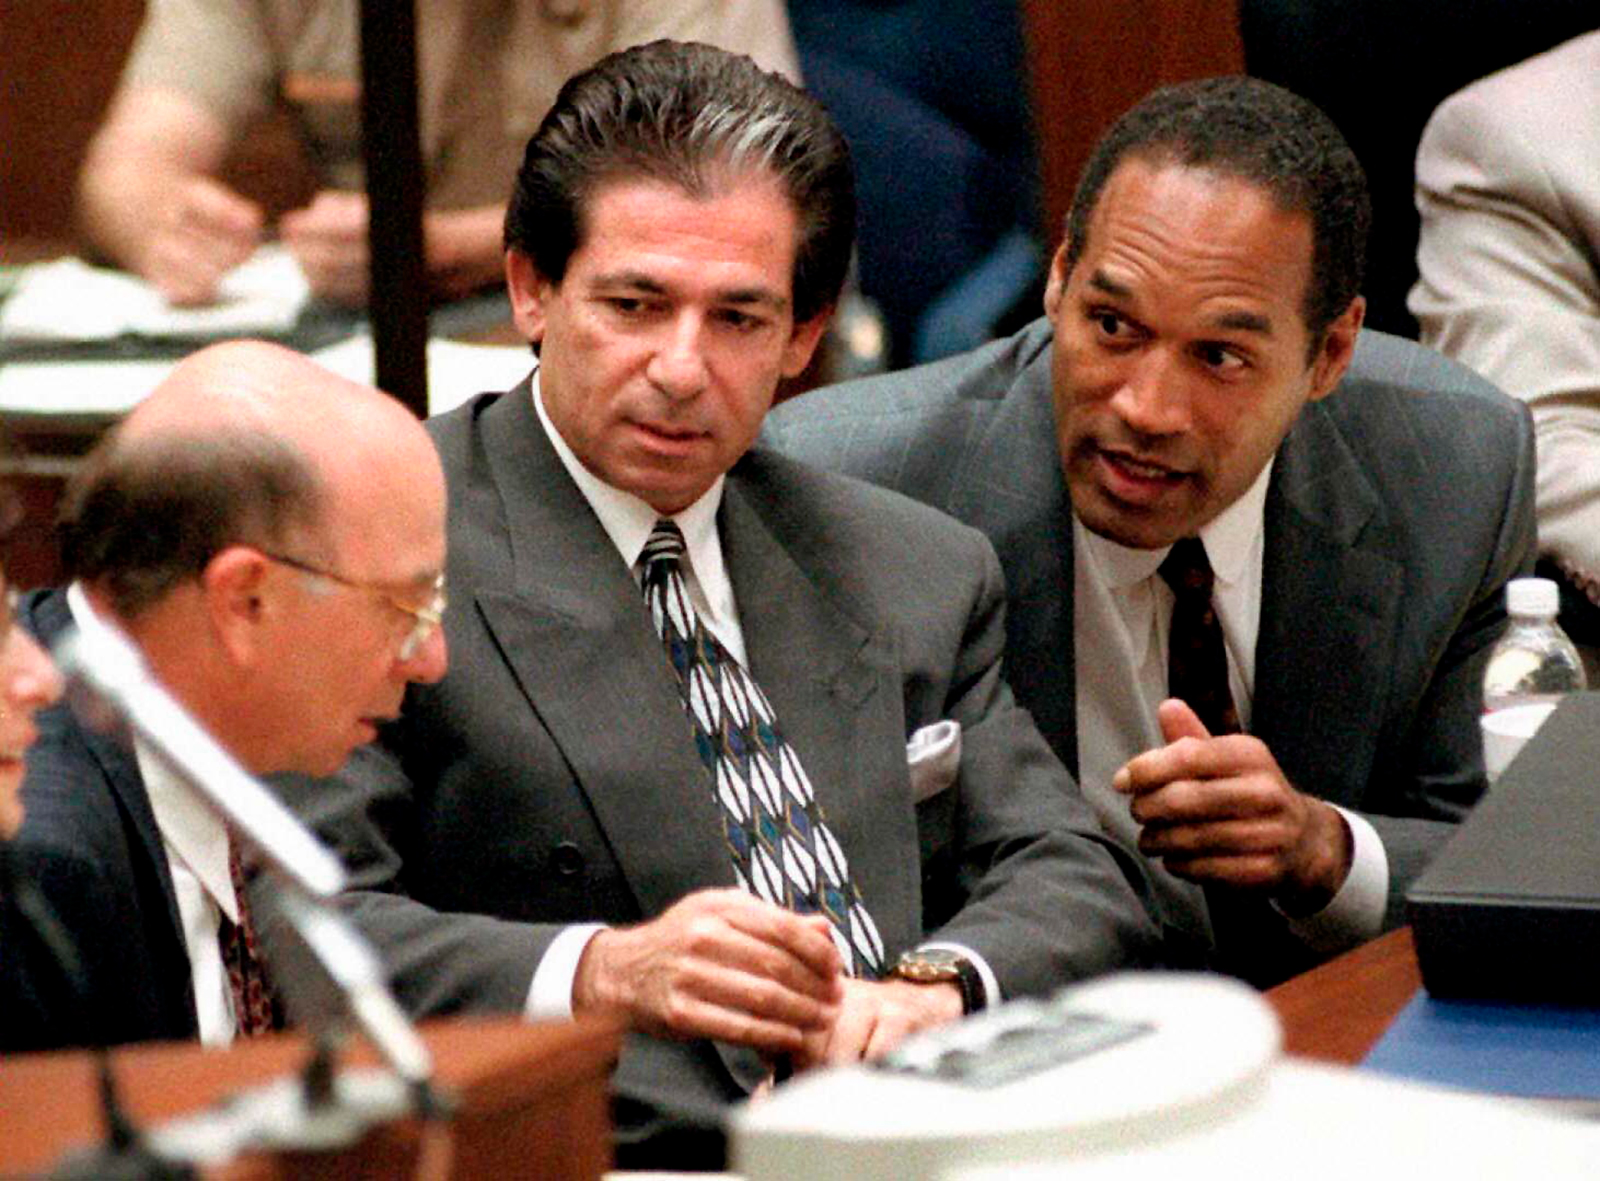 O.J. Simpson consults with Robert Kardashian, center, and Alvin Michelson, left, during a hearing in Los Angeles in May 1995.